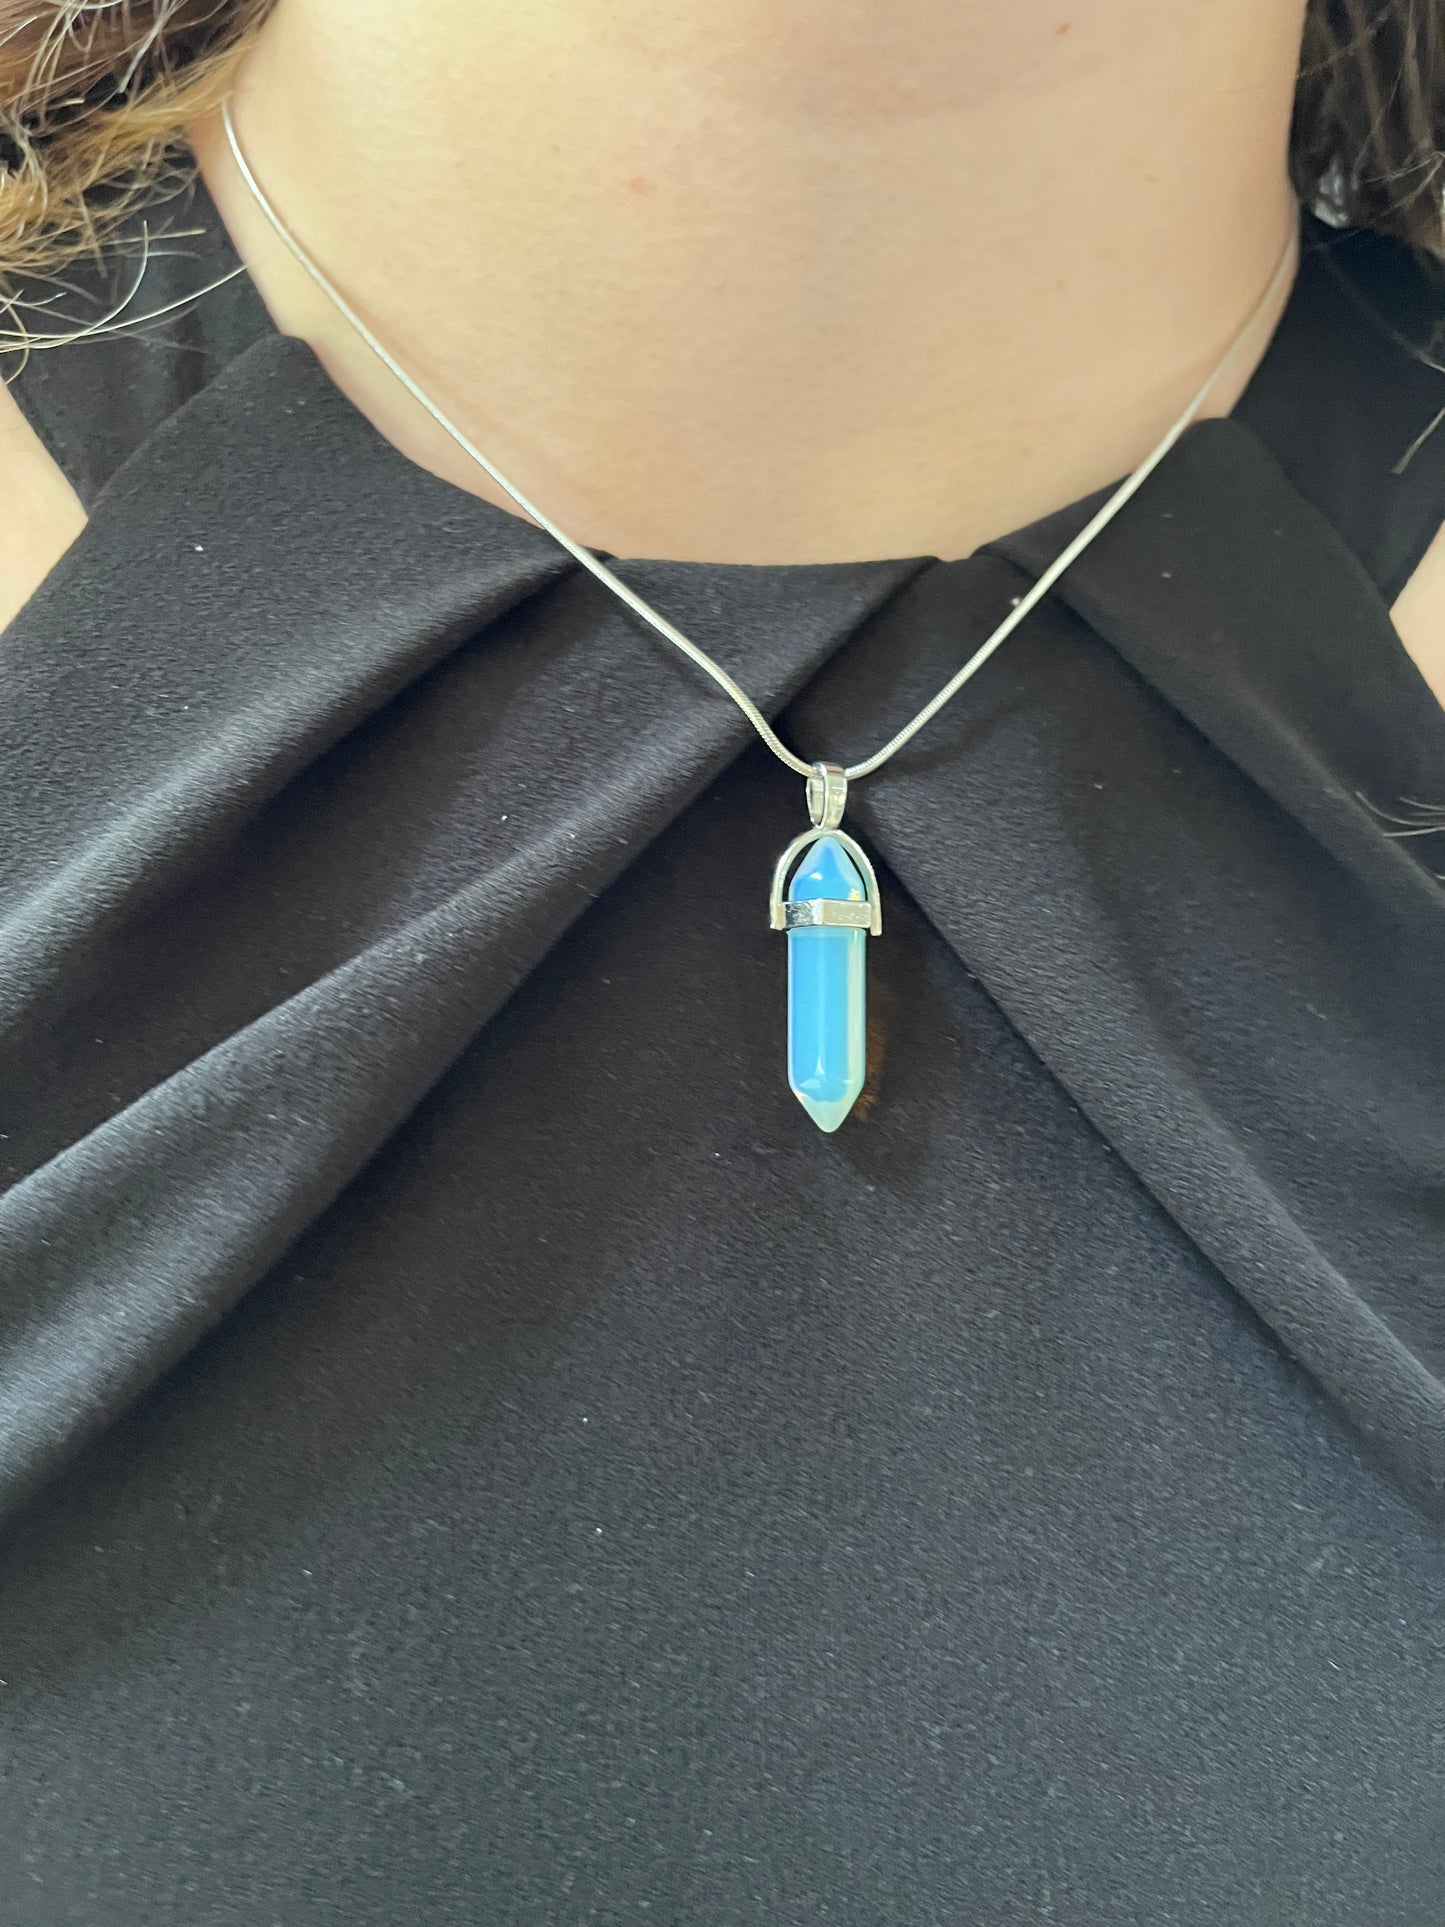 Blue Tone Opolite Stone Point Pendant Necklace on Faux Leather or Stainless Steel Chain.